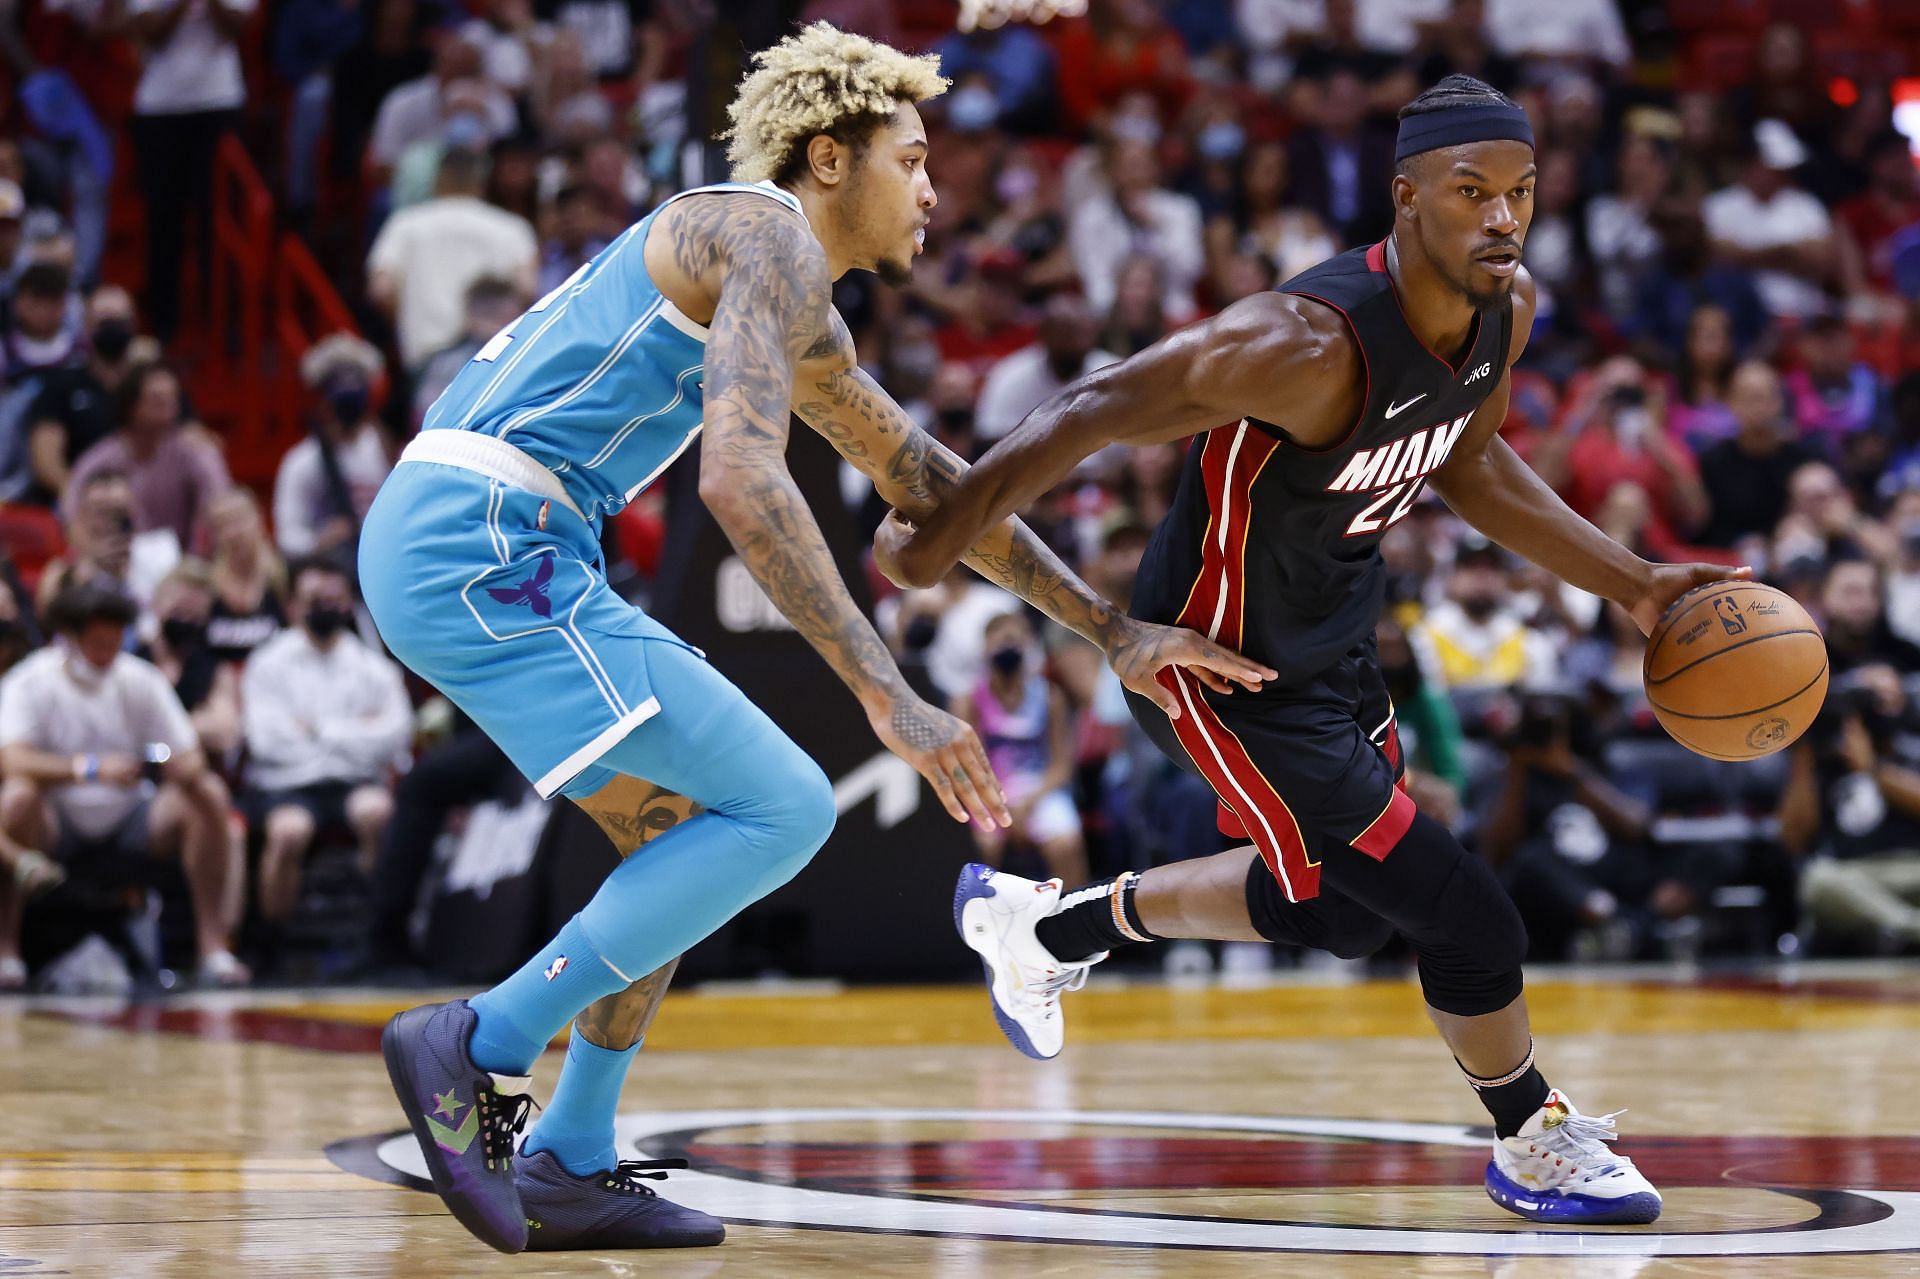 The Miami Heat will host the Charlotte Hornets on April 5th